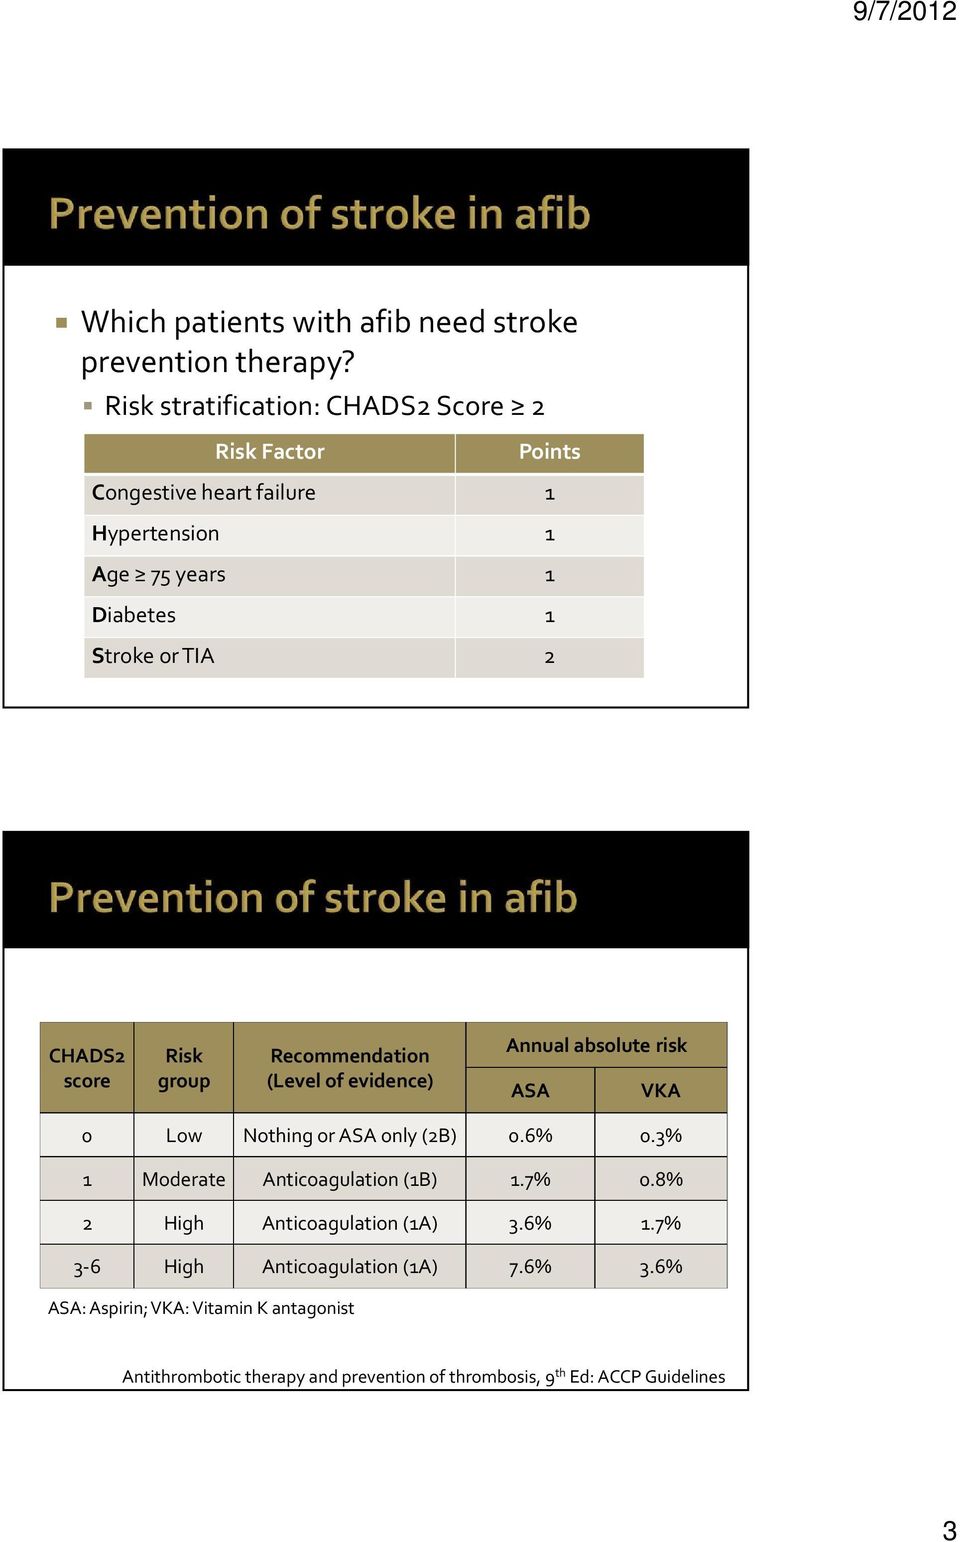 CHADS2 score Risk group Recommendation (Level of evidence) Annual absolute risk ASA VKA 0 Low Nothing or ASA only (2B) 0.6% 0.